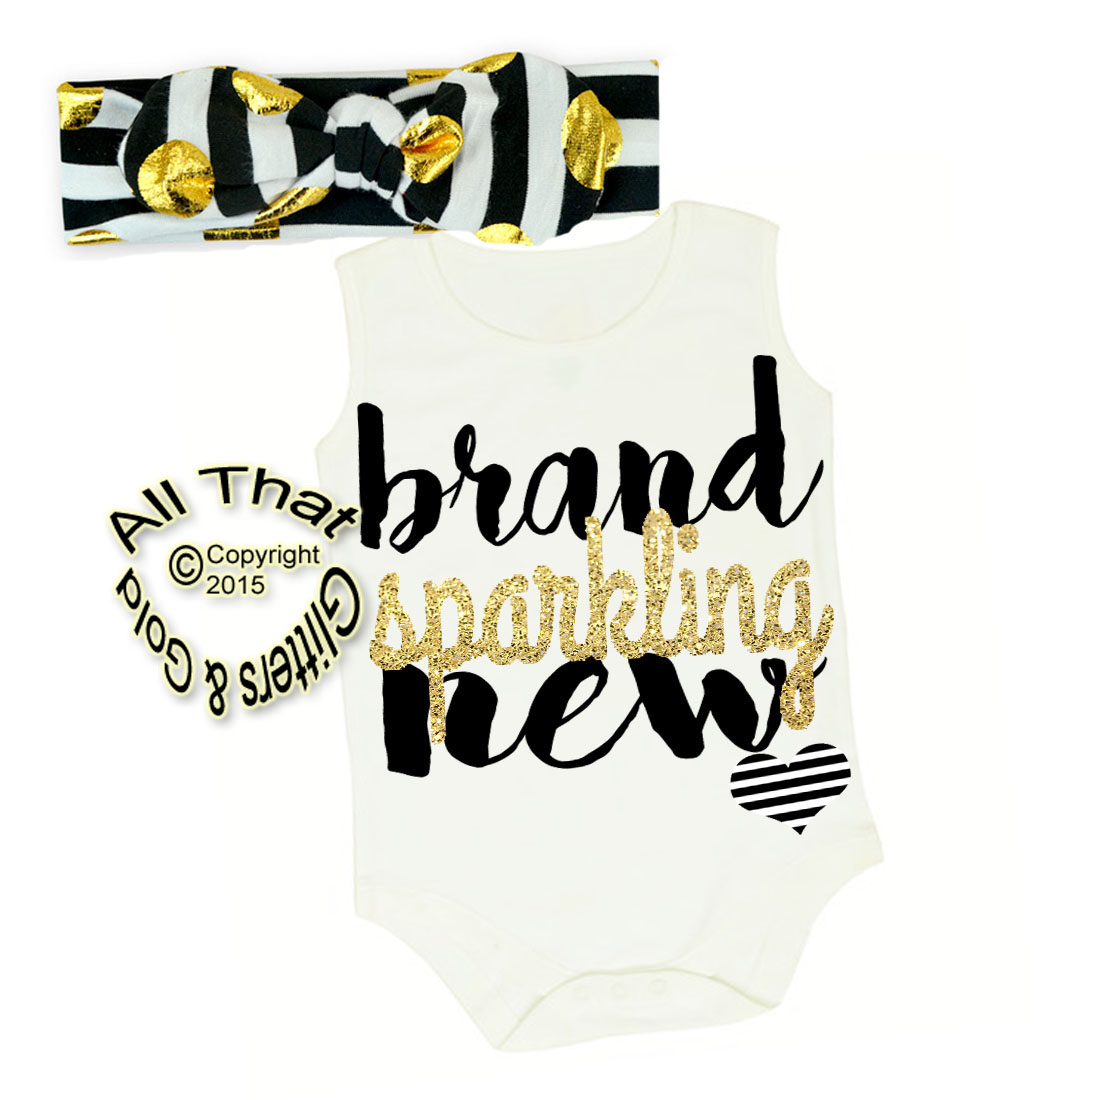 Black, White and Gold Glitter Brand Sparkling New Shirt or Outfit